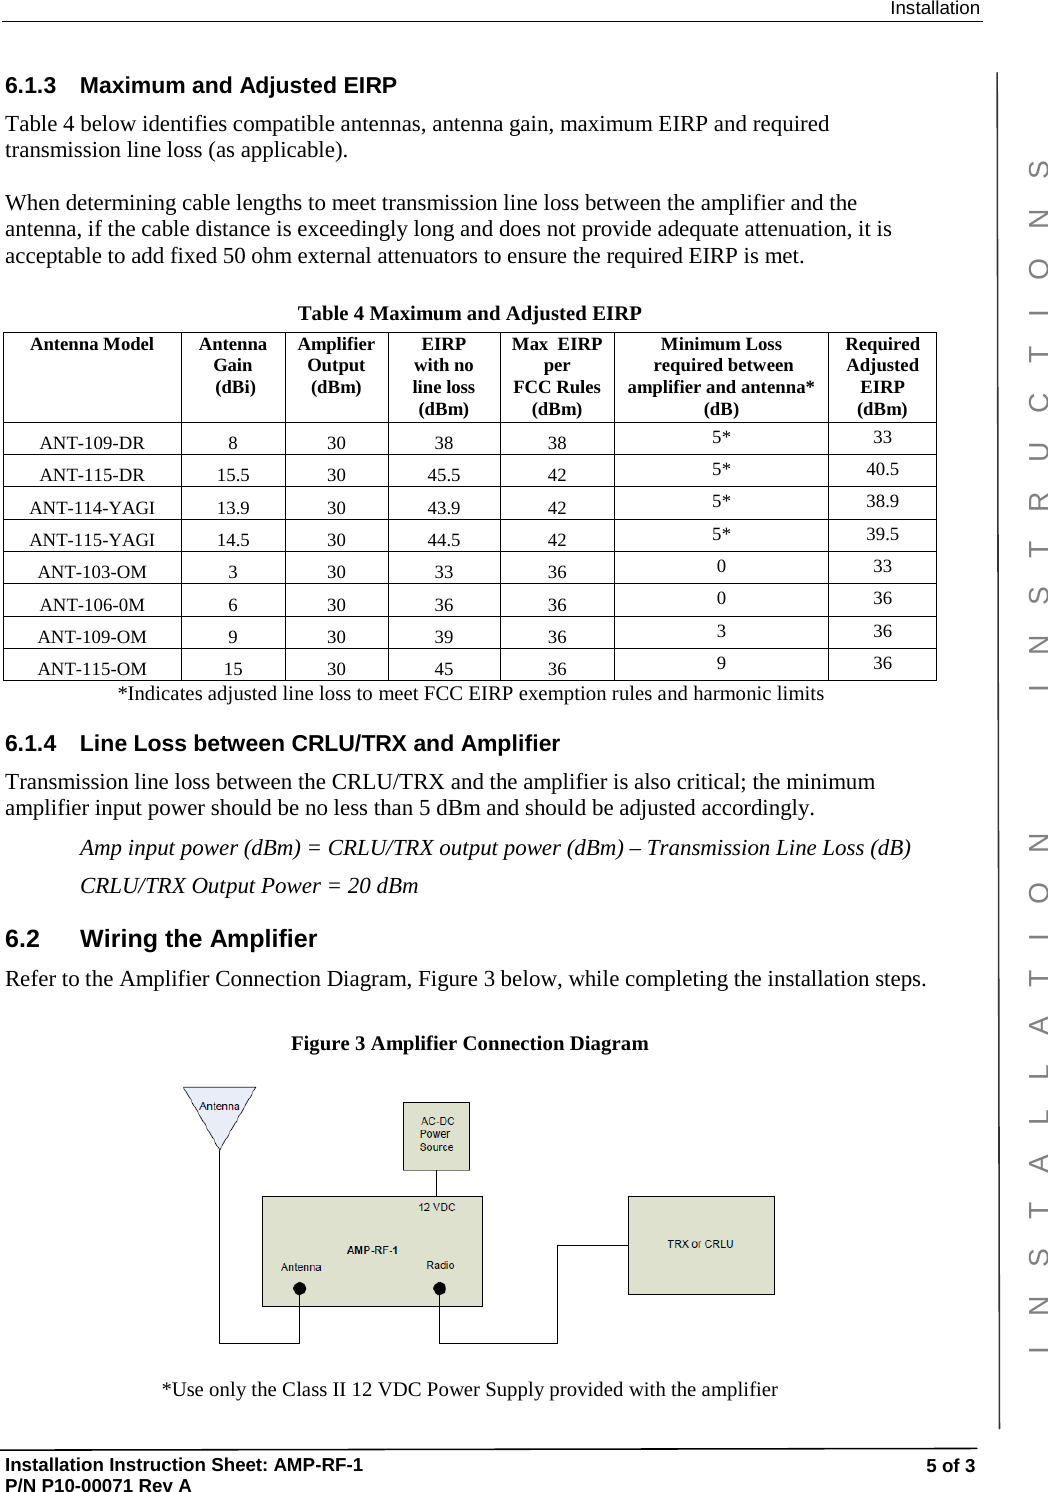 Installation Installation Instruction Sheet: AMP-RF-1 P/N P10-00071 Rev A INSTALLATION   INSTRUCTIONS 5 of 3 6.1.3 Maximum and Adjusted EIRP Table 4 below identifies compatible antennas, antenna gain, maximum EIRP and required transmission line loss (as applicable).  When determining cable lengths to meet transmission line loss between the amplifier and the antenna, if the cable distance is exceedingly long and does not provide adequate attenuation, it is acceptable to add fixed 50 ohm external attenuators to ensure the required EIRP is met.    Table 4 Maximum and Adjusted EIRP  Antenna Model Antenna Gain  (dBi) Amplifier Output (dBm) EIRP   with no line loss (dBm) Max  EIRP per  FCC Rules (dBm) Minimum Loss  required between amplifier and antenna* (dB) Required Adjusted  EIRP  (dBm) ANT-109-DR 8 30 38 38 5*  33 ANT-115-DR 15.5 30 45.5 42 5*  40.5 ANT-114-YAGI 13.9 30 43.9 42 5*  38.9 ANT-115-YAGI 14.5 30 44.5 42 5*  39.5 ANT-103-OM 3 30 33 36 0  33 ANT-106-0M 6 30 36 36 0  36 ANT-109-OM 9 30 39 36 3  36 ANT-115-OM 15 30 45 36 9  36 *Indicates adjusted line loss to meet FCC EIRP exemption rules and harmonic limits 6.1.4 Line Loss between CRLU/TRX and Amplifier Transmission line loss between the CRLU/TRX and the amplifier is also critical; the minimum amplifier input power should be no less than 5 dBm and should be adjusted accordingly. Amp input power (dBm) = CRLU/TRX output power (dBm) – Transmission Line Loss (dB) CRLU/TRX Output Power = 20 dBm 6.2 Wiring the Amplifier Refer to the Amplifier Connection Diagram, Figure 3 below, while completing the installation steps.  Figure 3 Amplifier Connection Diagram     *Use only the Class II 12 VDC Power Supply provided with the amplifier 